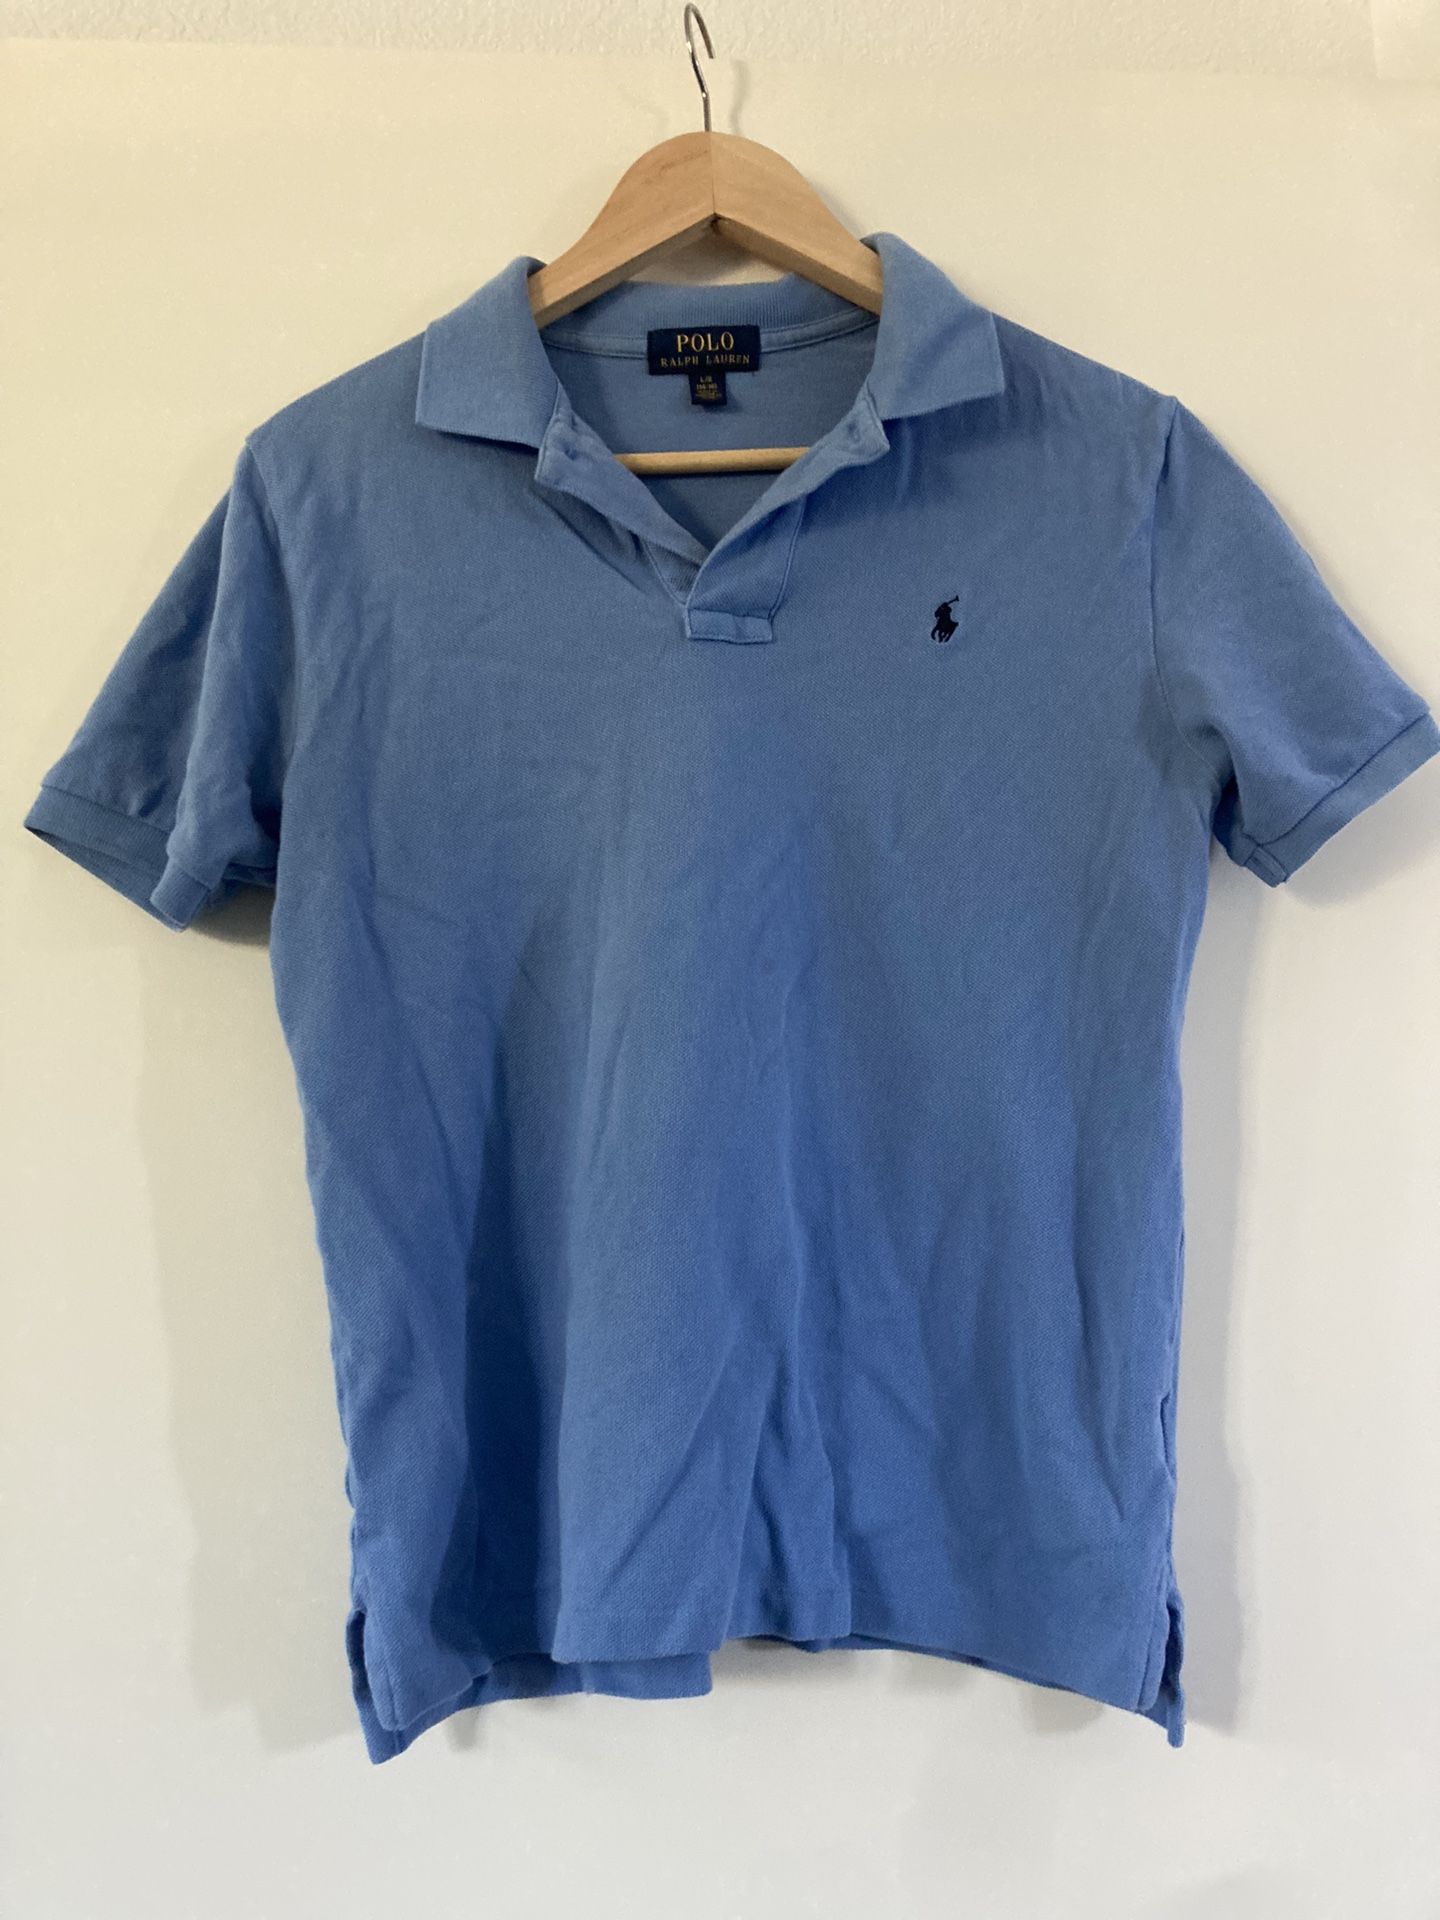 Preowned Boys’ Ralph Lauren Polo - Periwinkle / Light Blue - Large 14/16